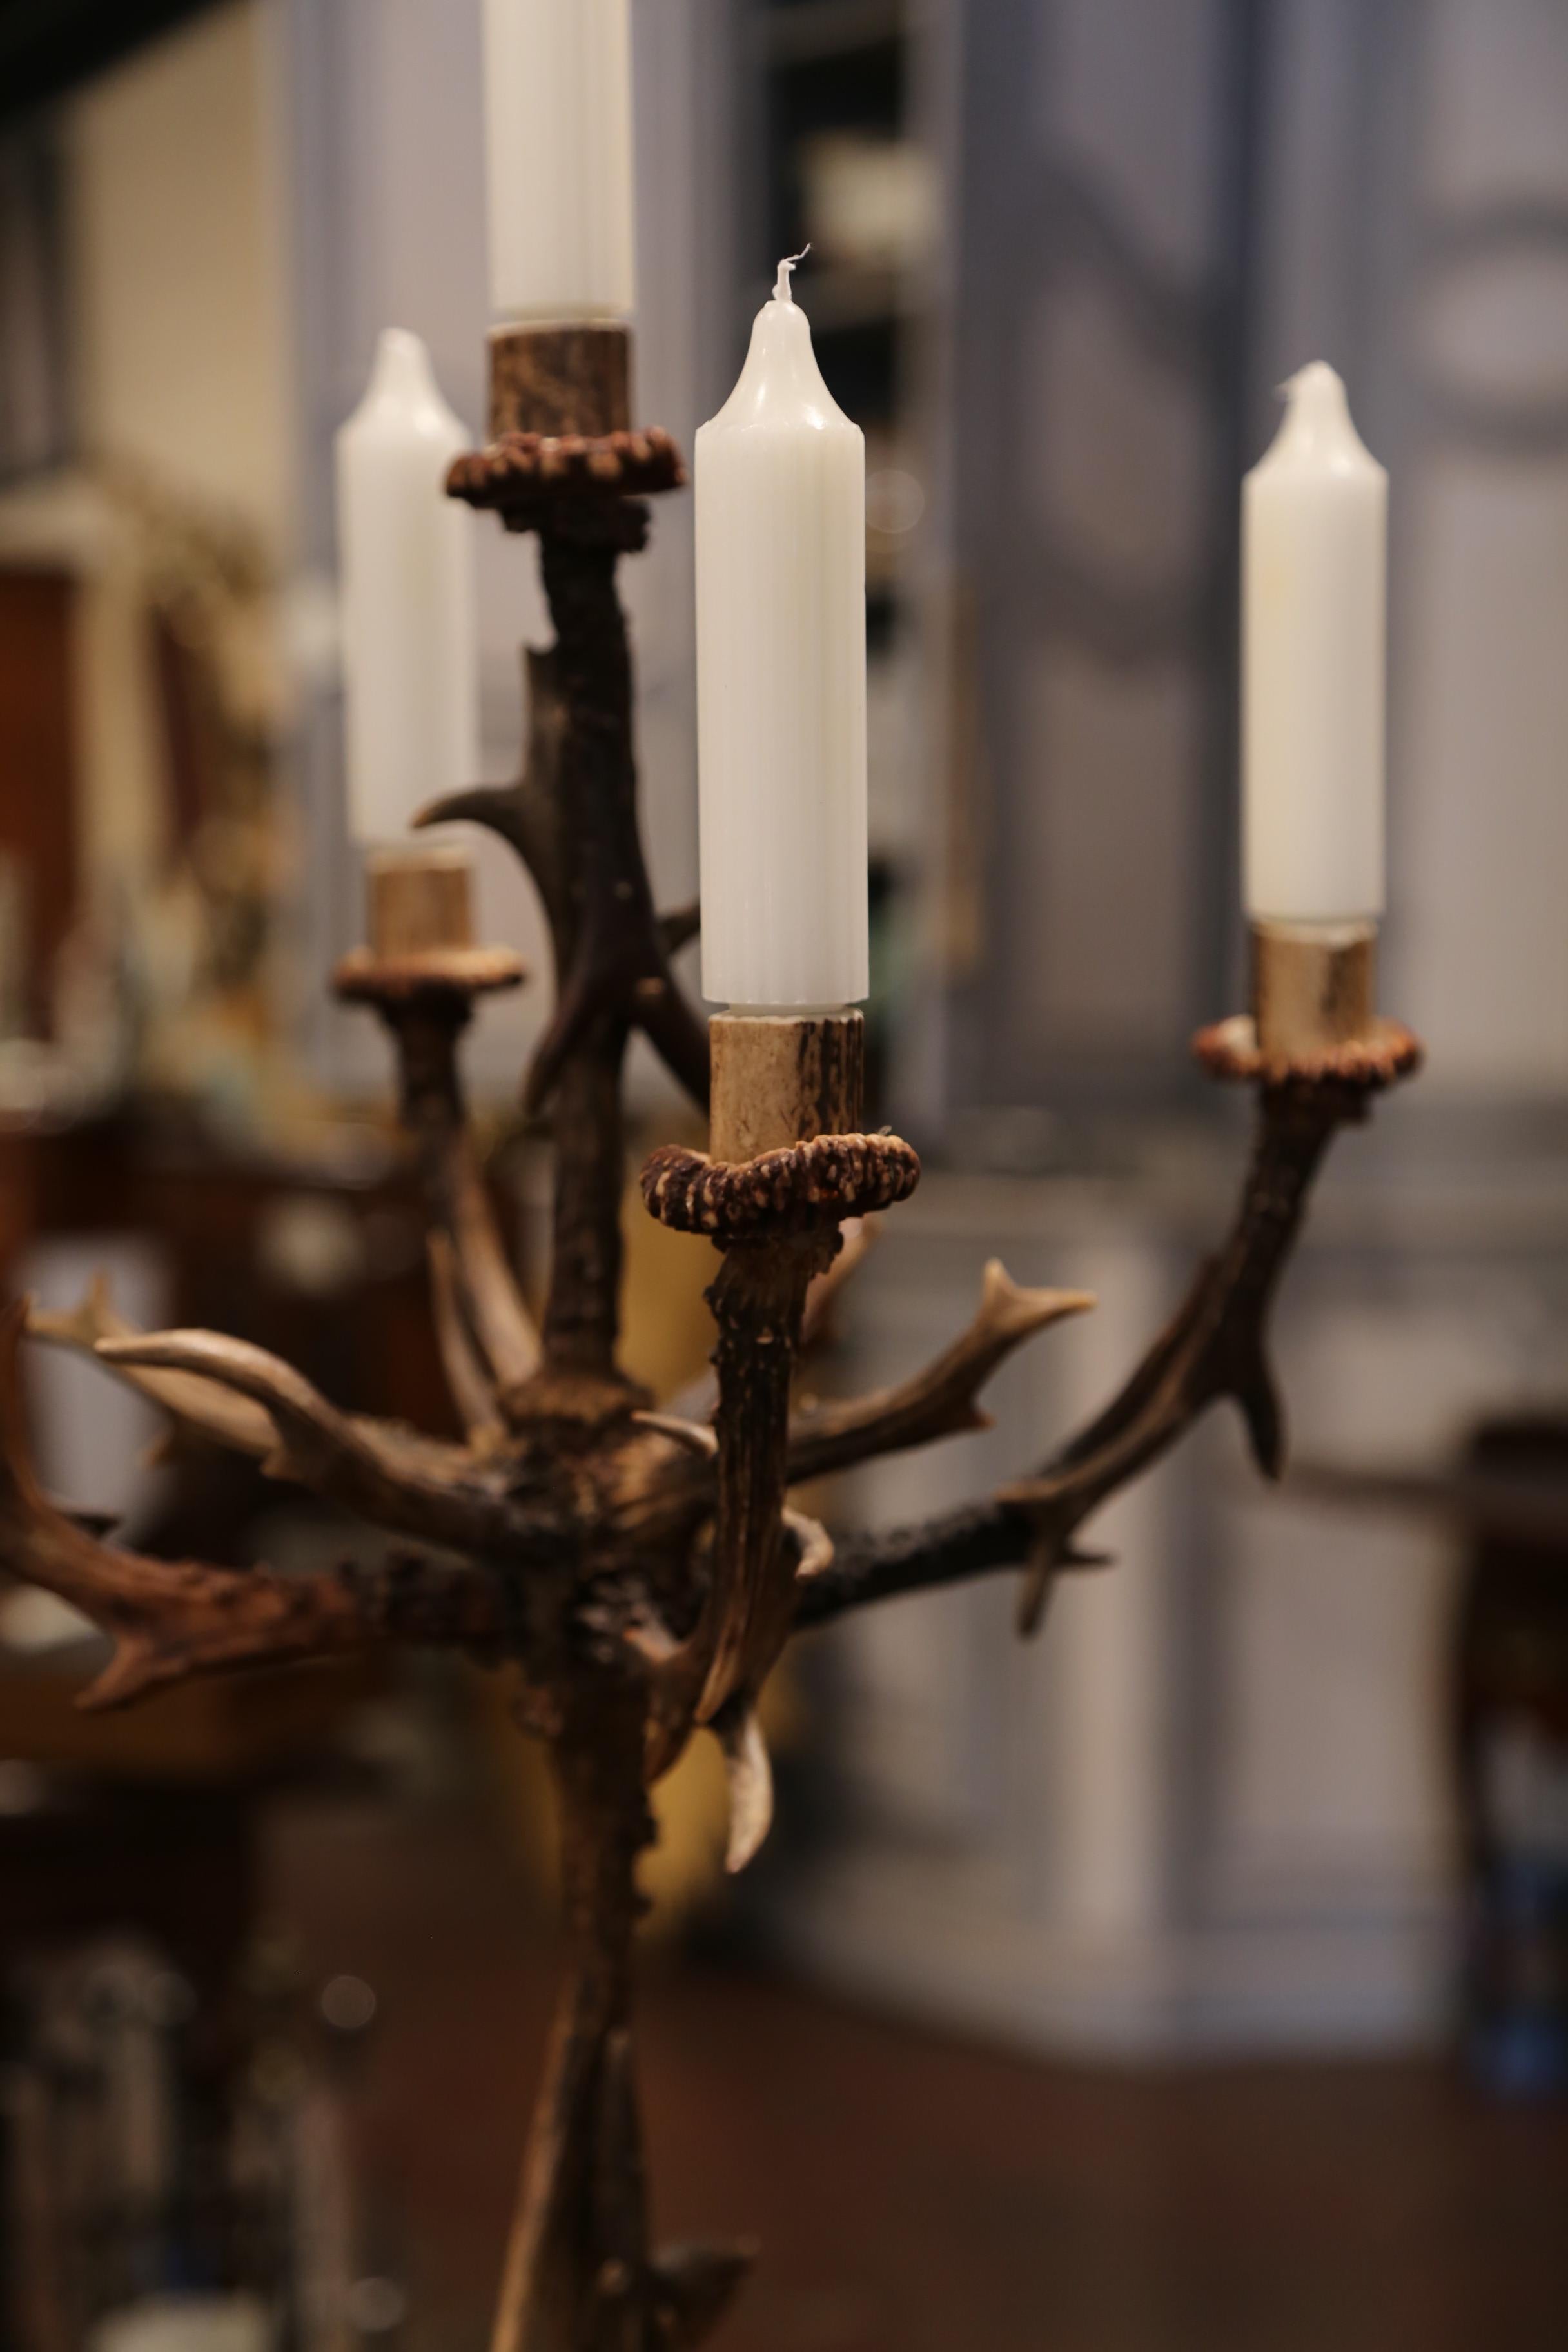 20th Century Midcentury Five-Arm Candelabra Made with Deer Antlers